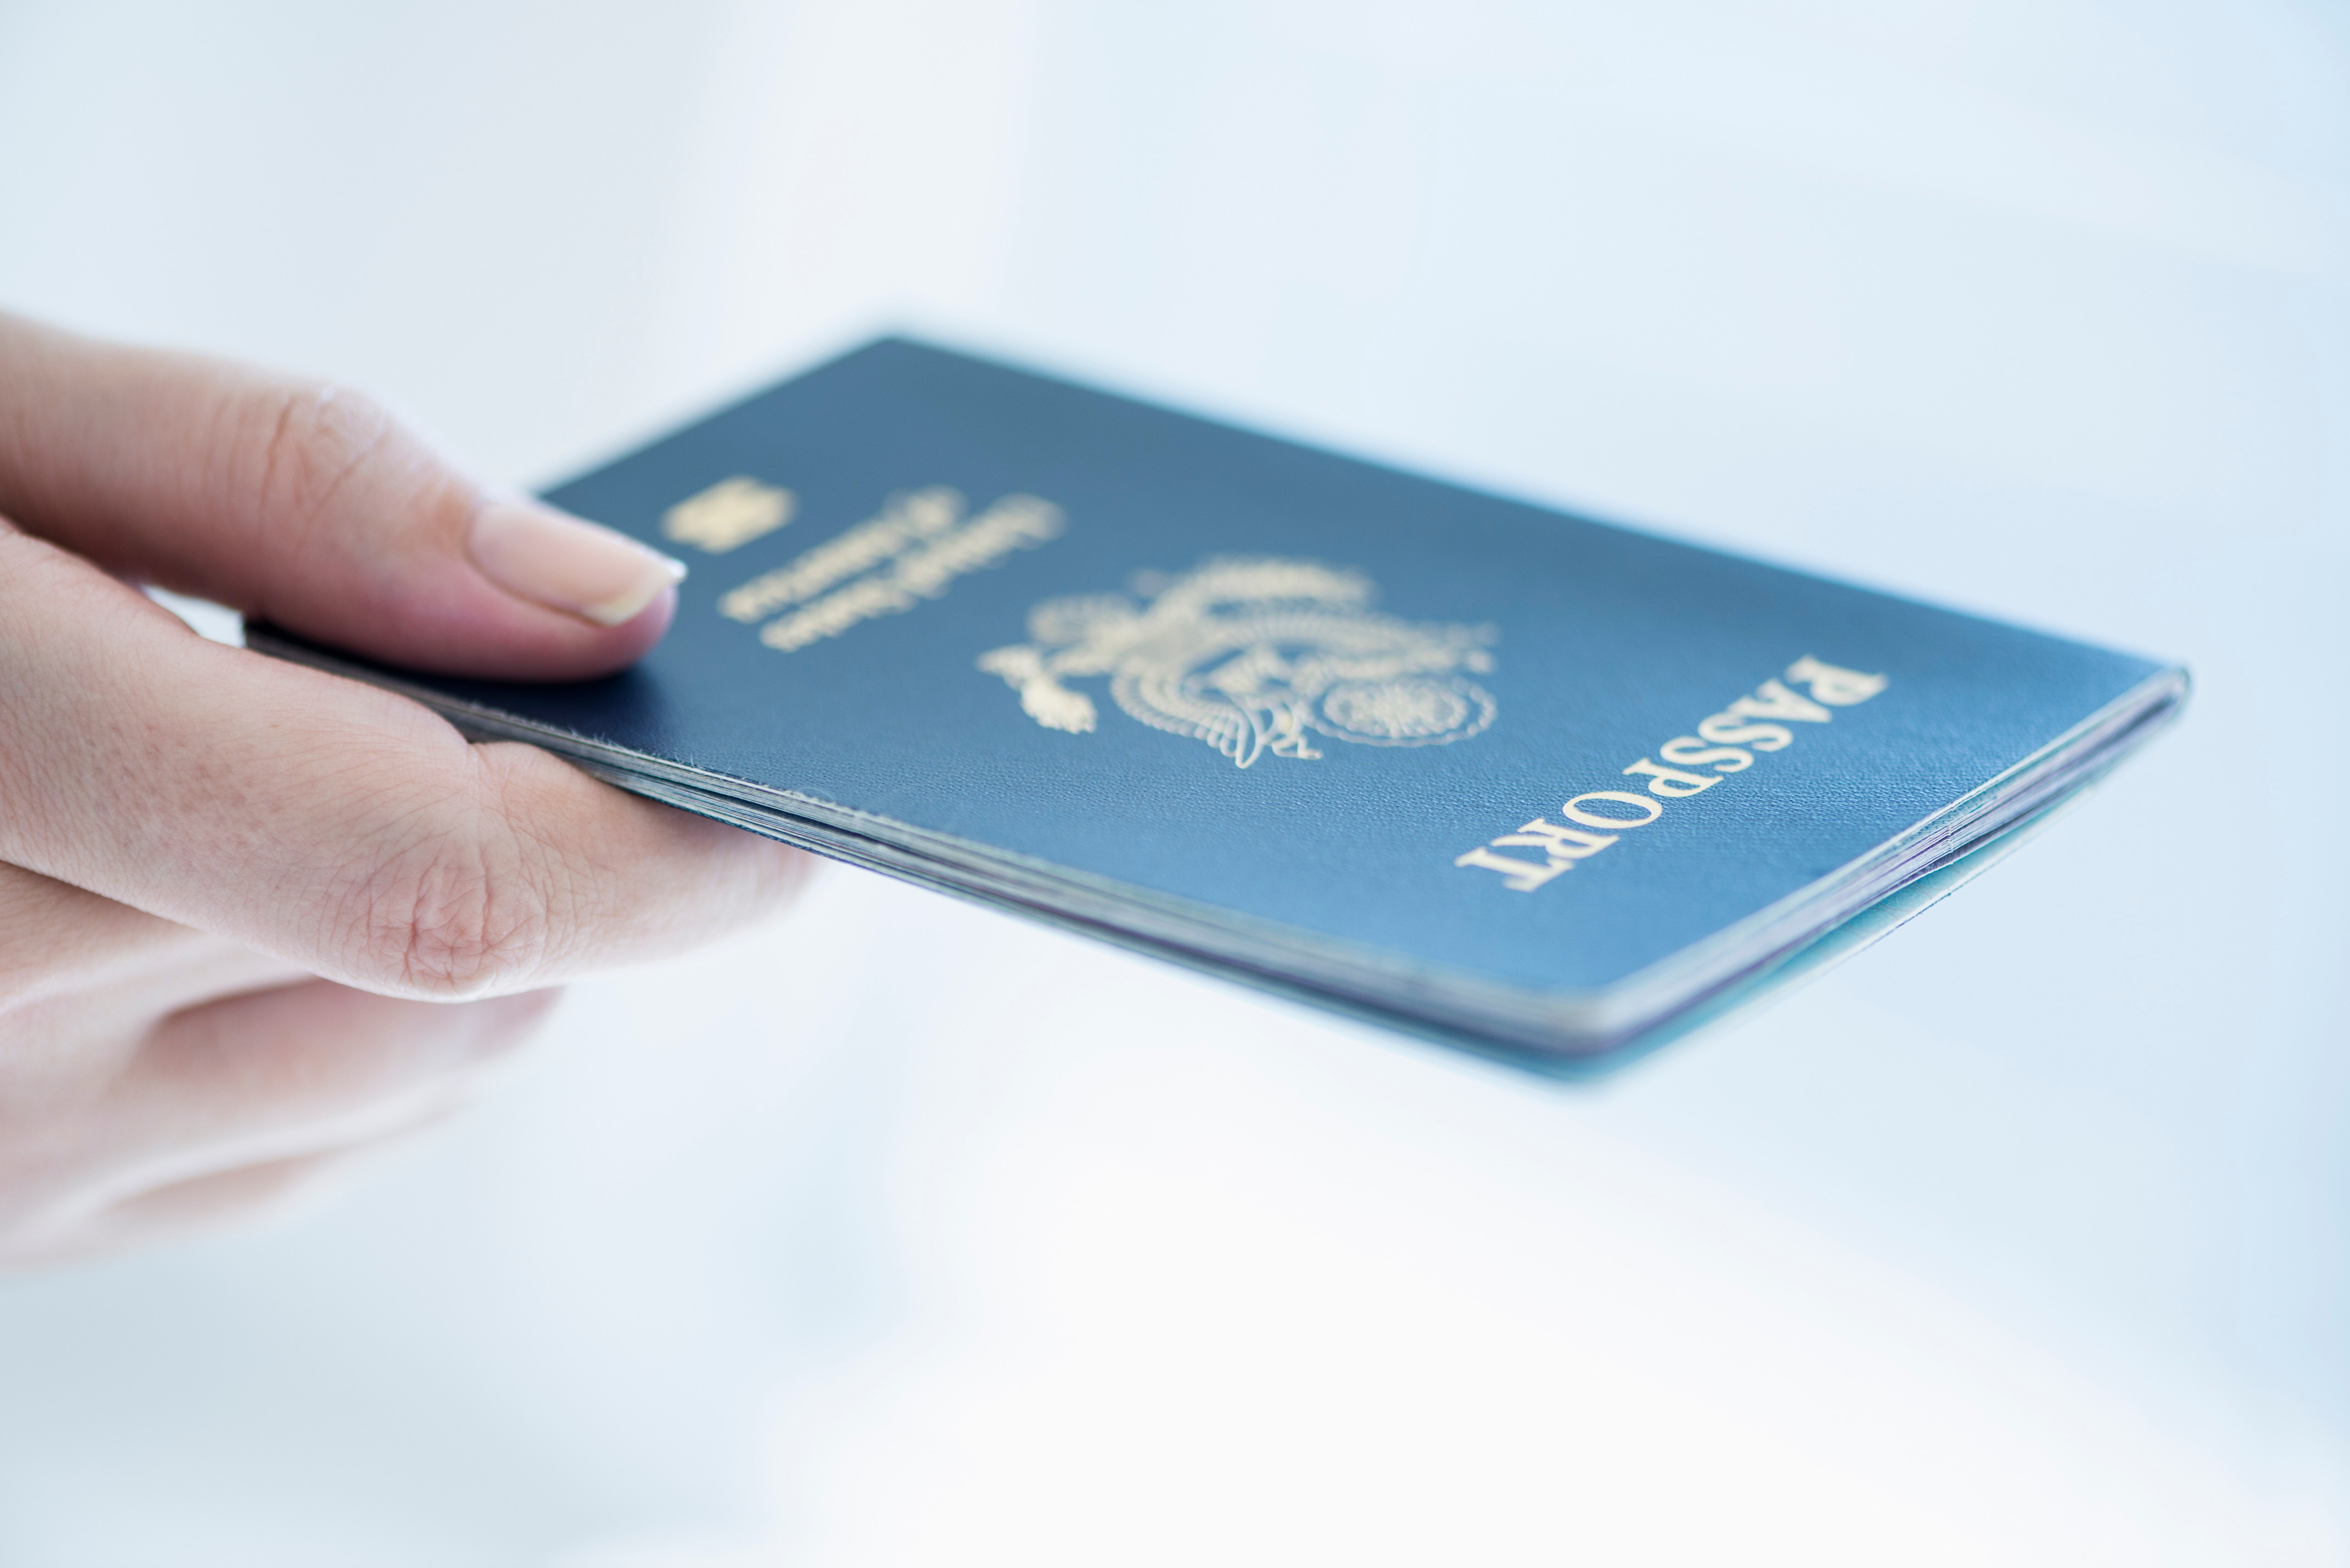 can you expedite a passport after applying